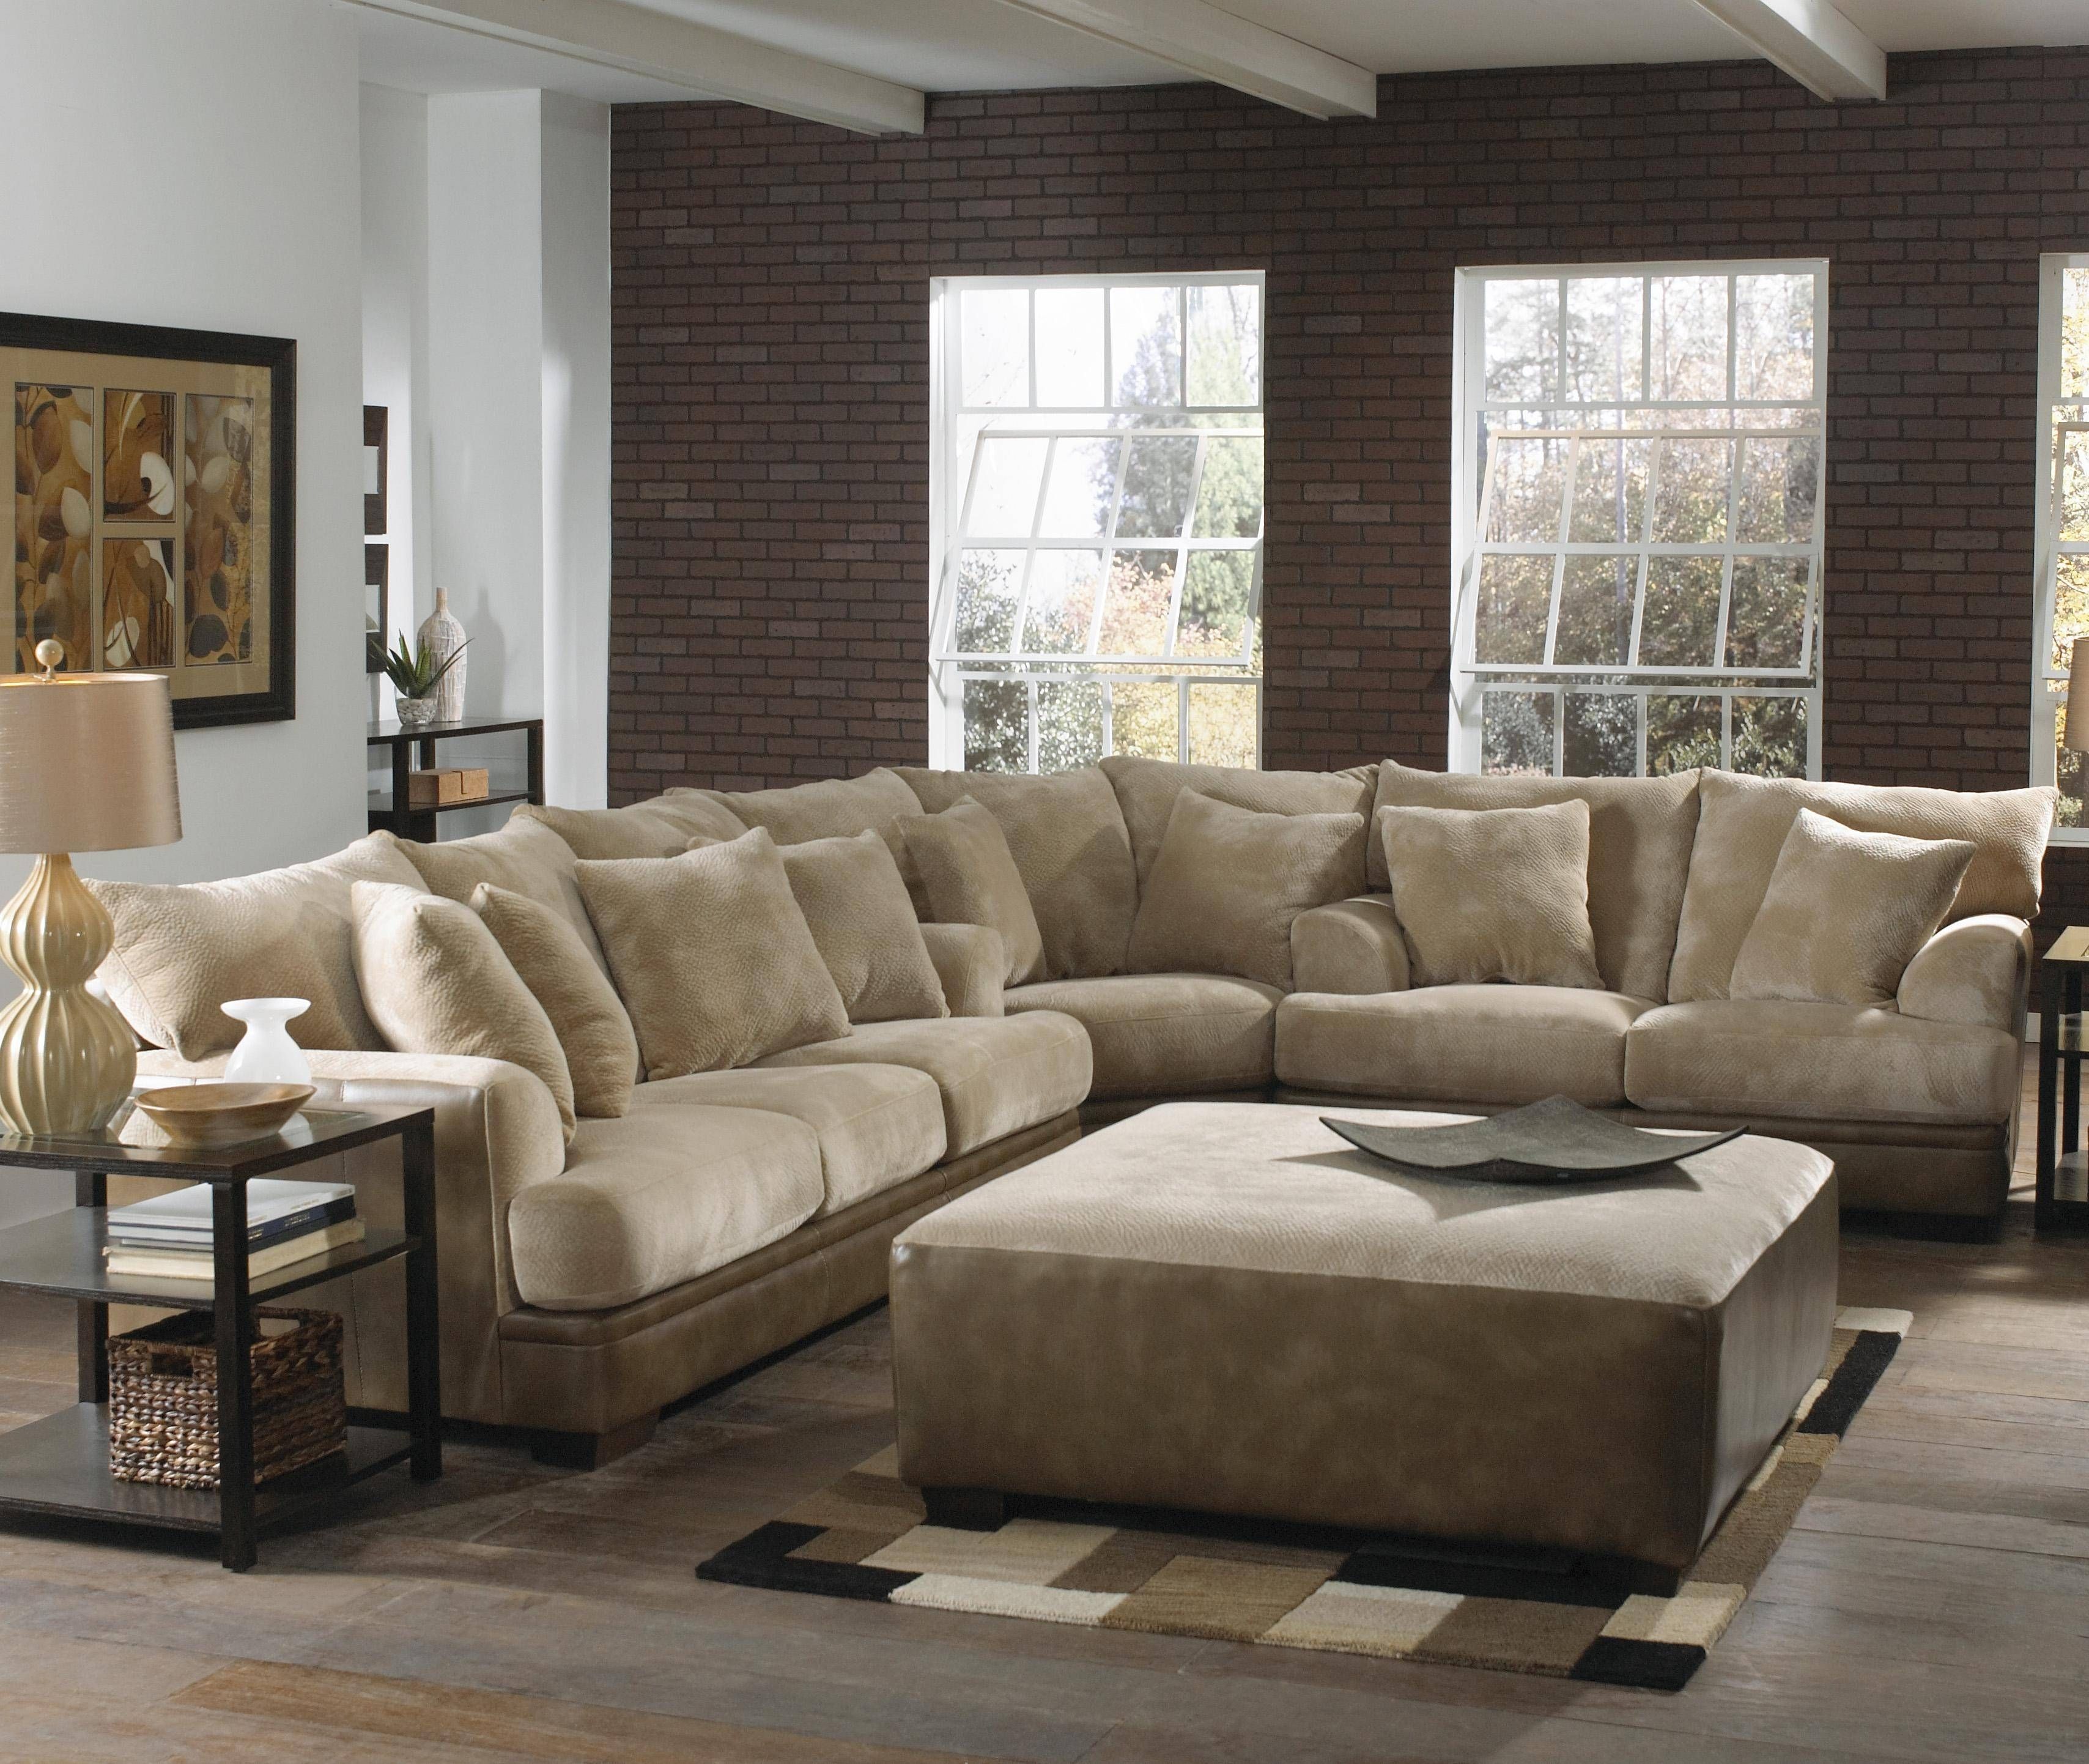 12 Inspirations Of European Style Sectional Sofas Within European Style Sectional Sofas (Photo 7 of 30)